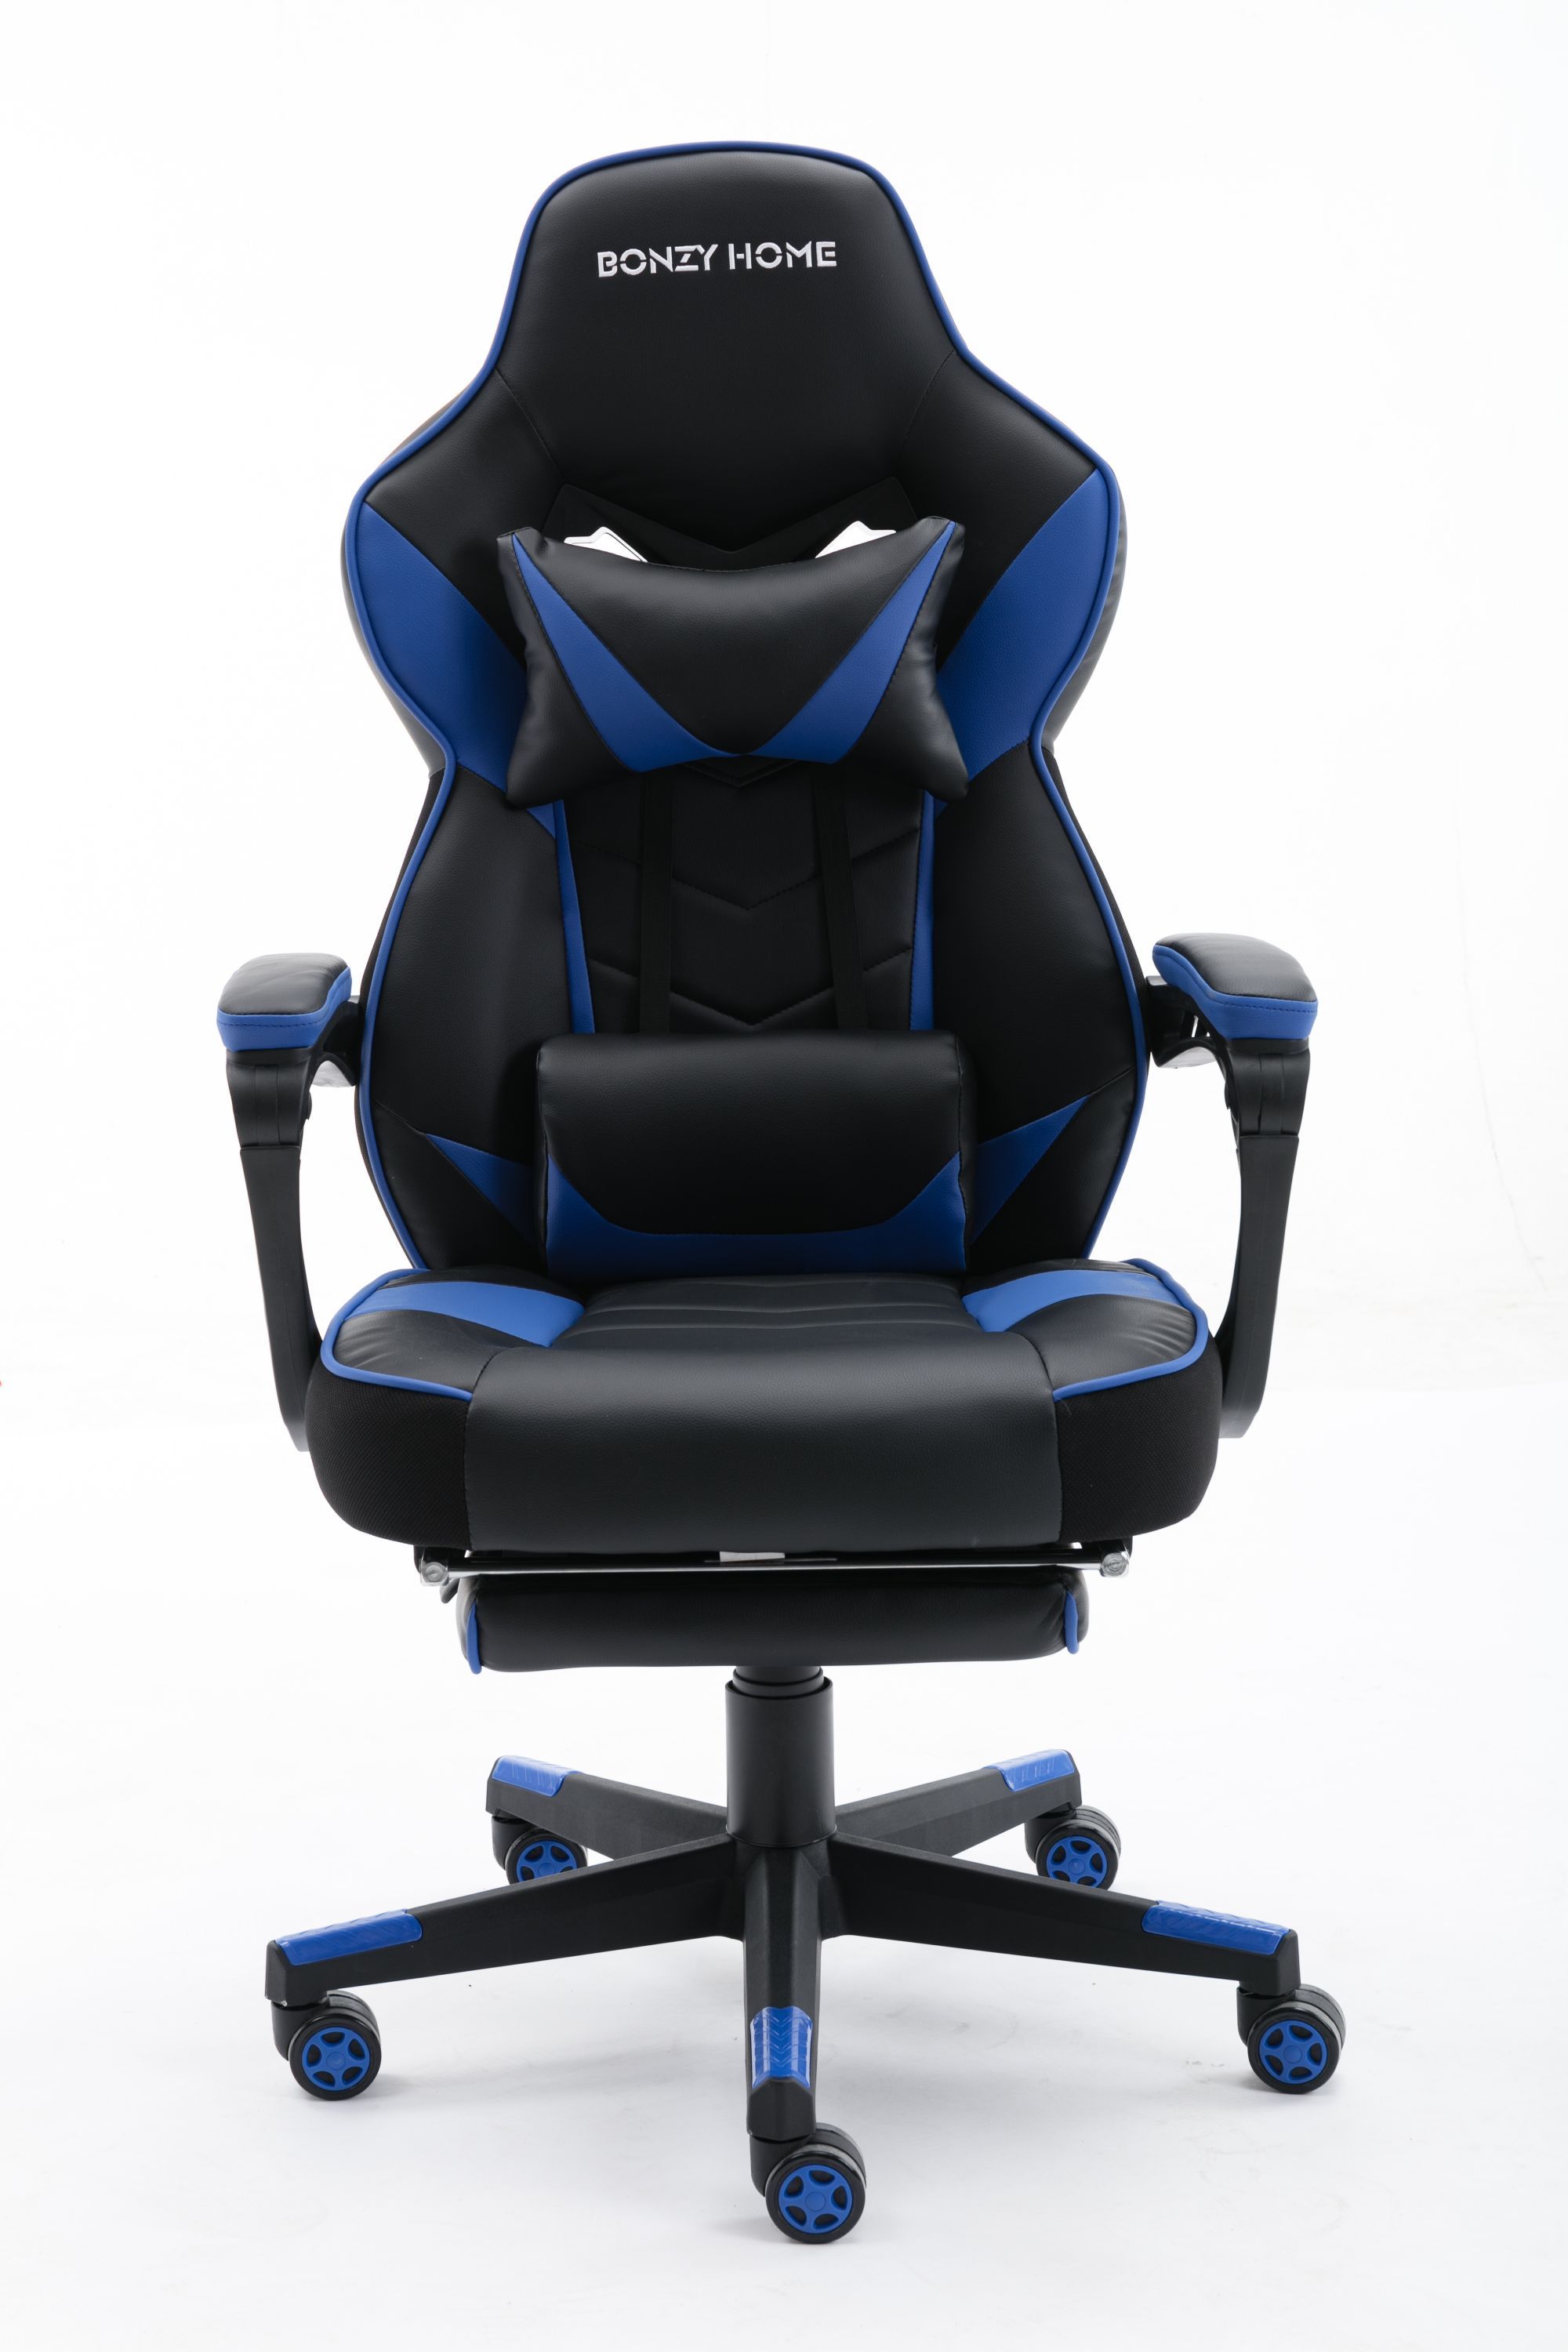 Details about   Ergonomic Gaming Racing Chair Computer Desk Seat Leather Swivel Office Furniture 